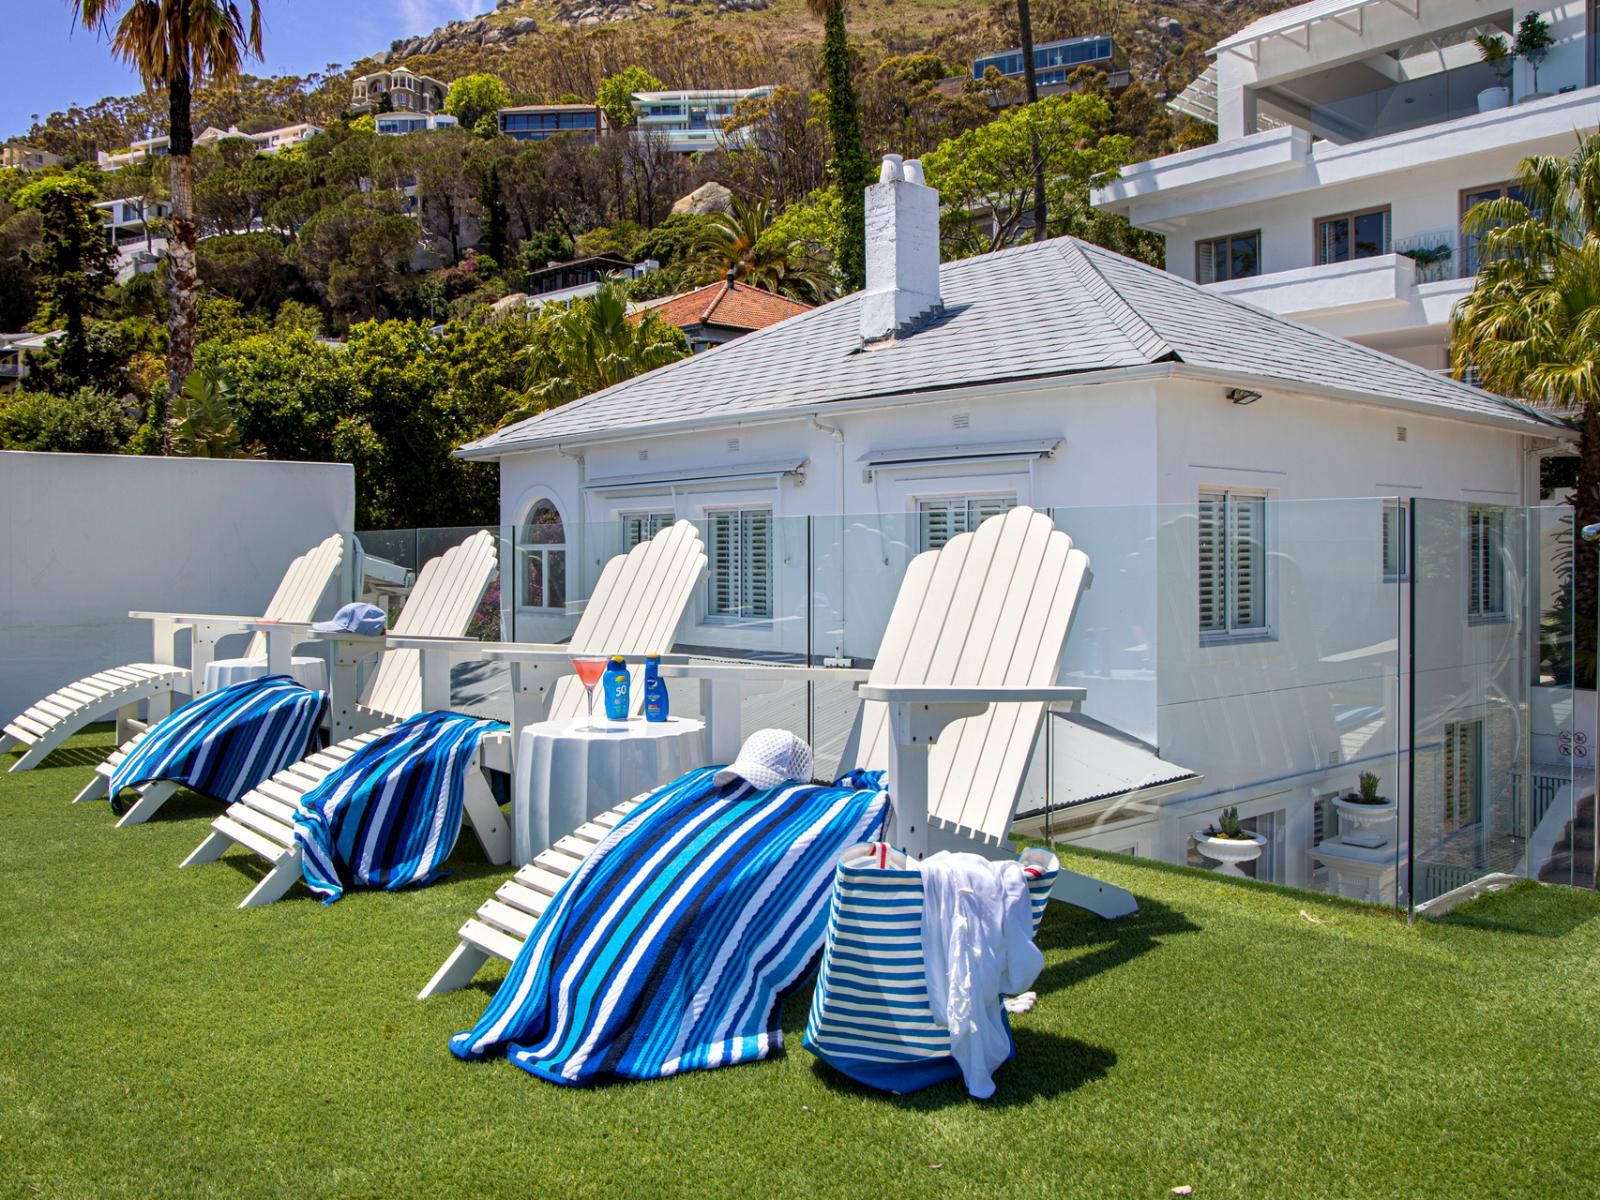 Clifton Boutique Apartments Clifton Cape Town Western Cape South Africa House, Building, Architecture, Swimming Pool